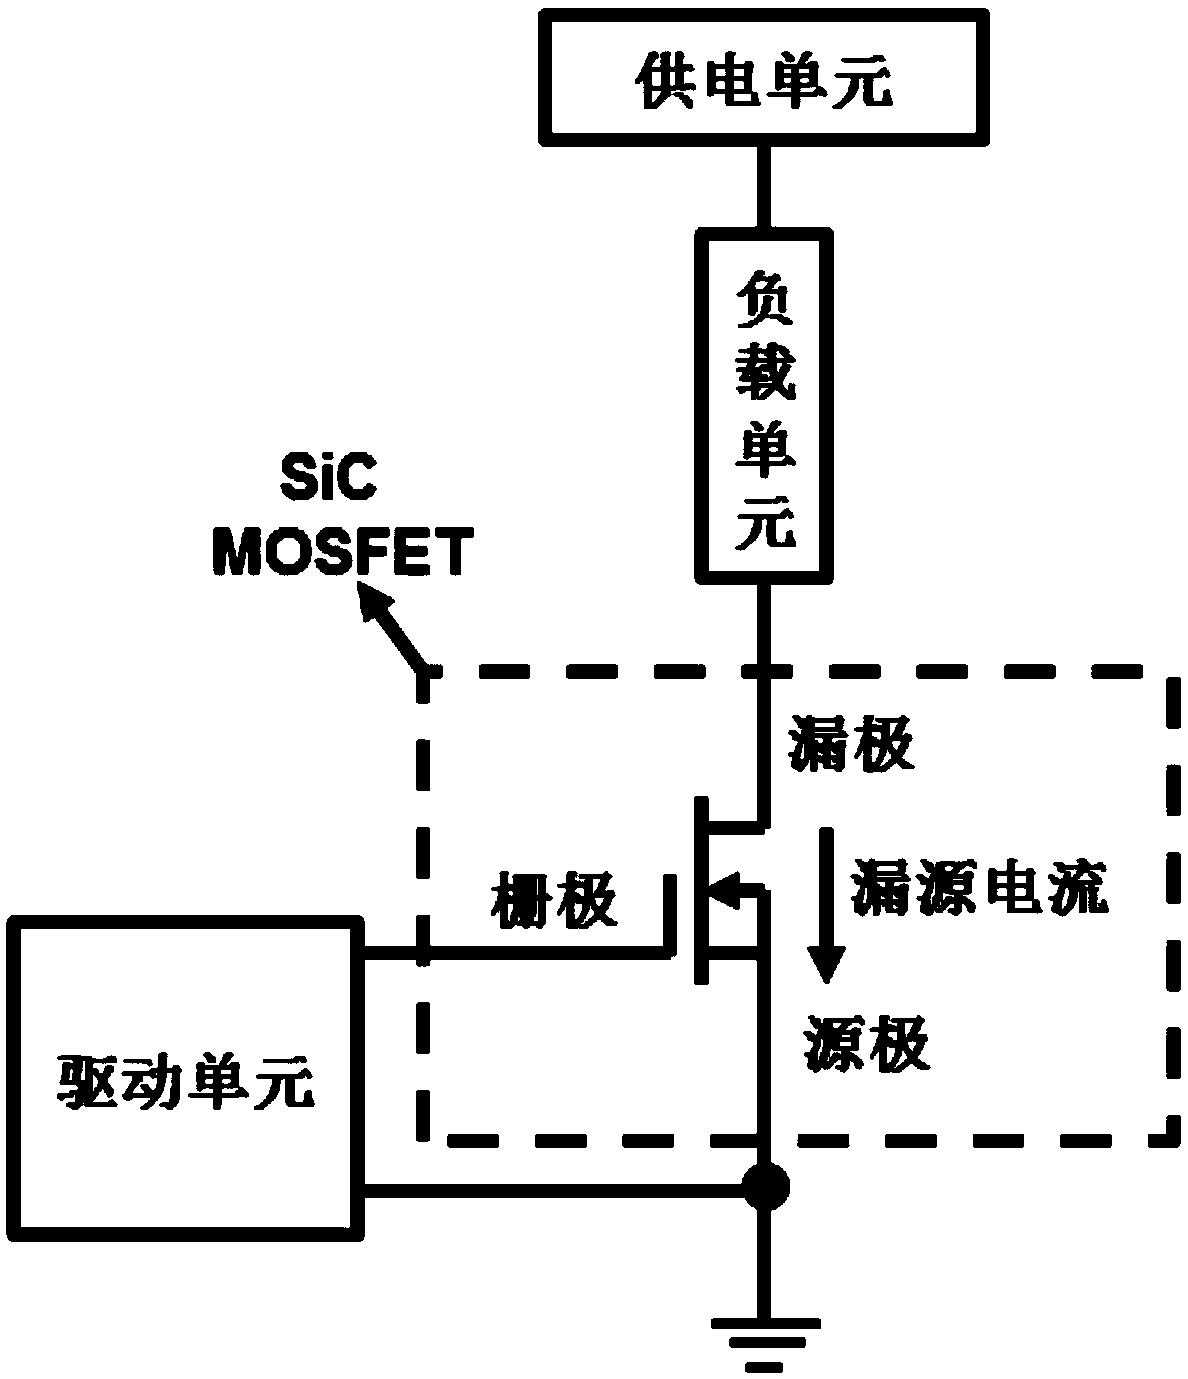 Automatic sorting circuit based on the parallel use of SiCMOSFET device, and automatic sorting method